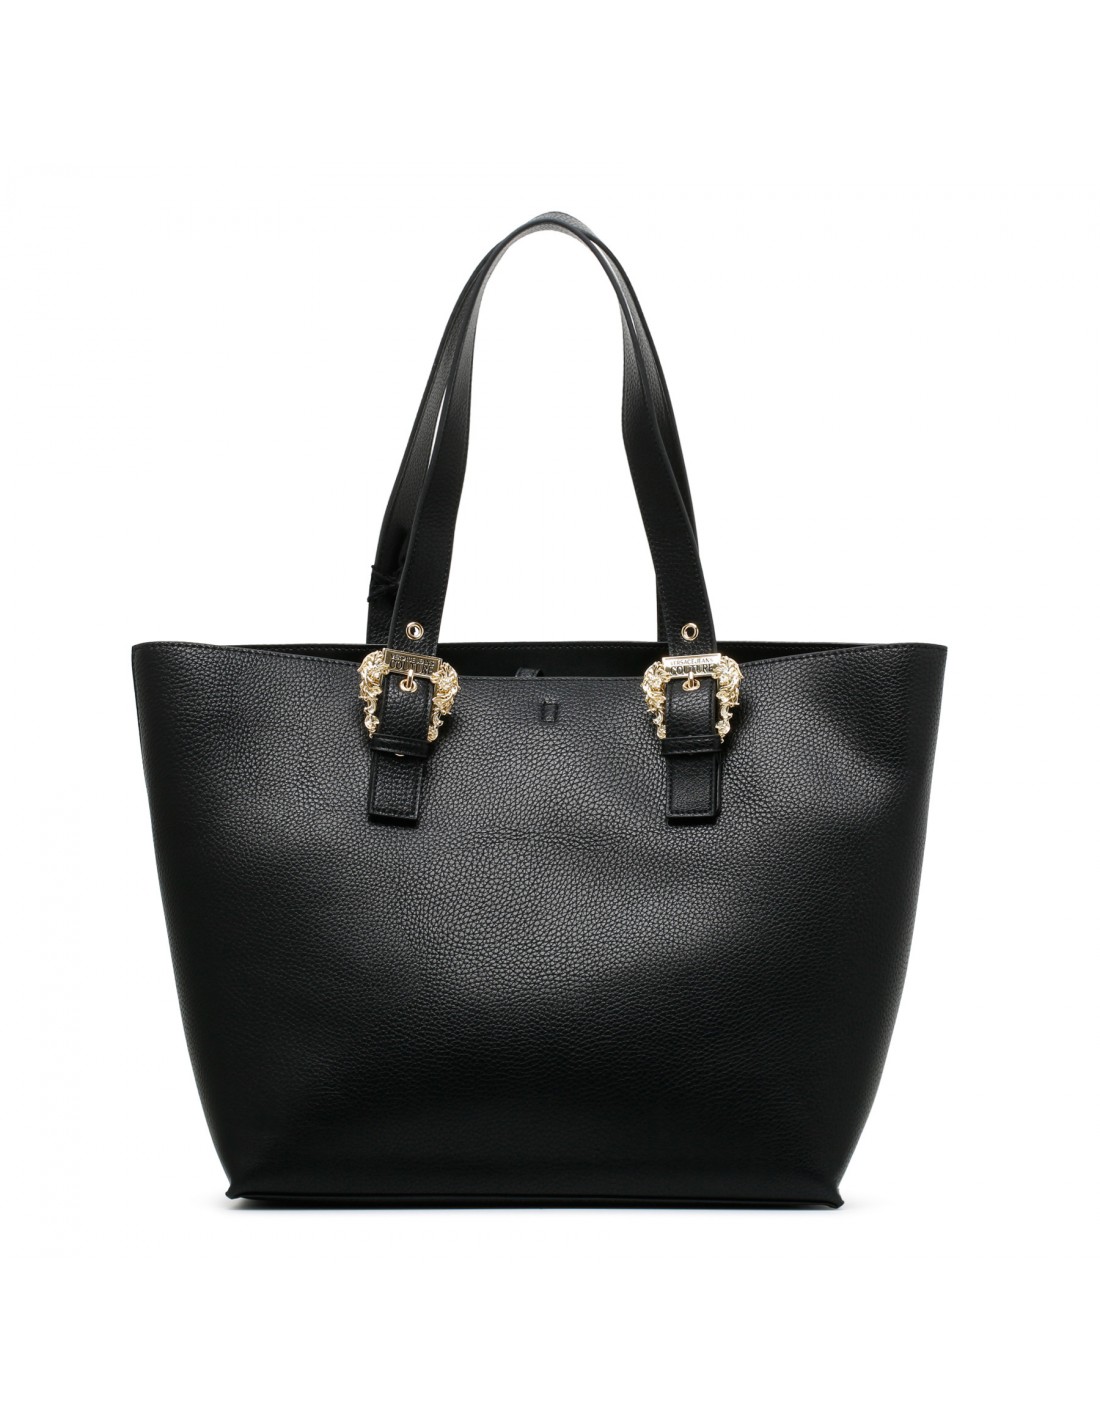 Couture 1 tote bag